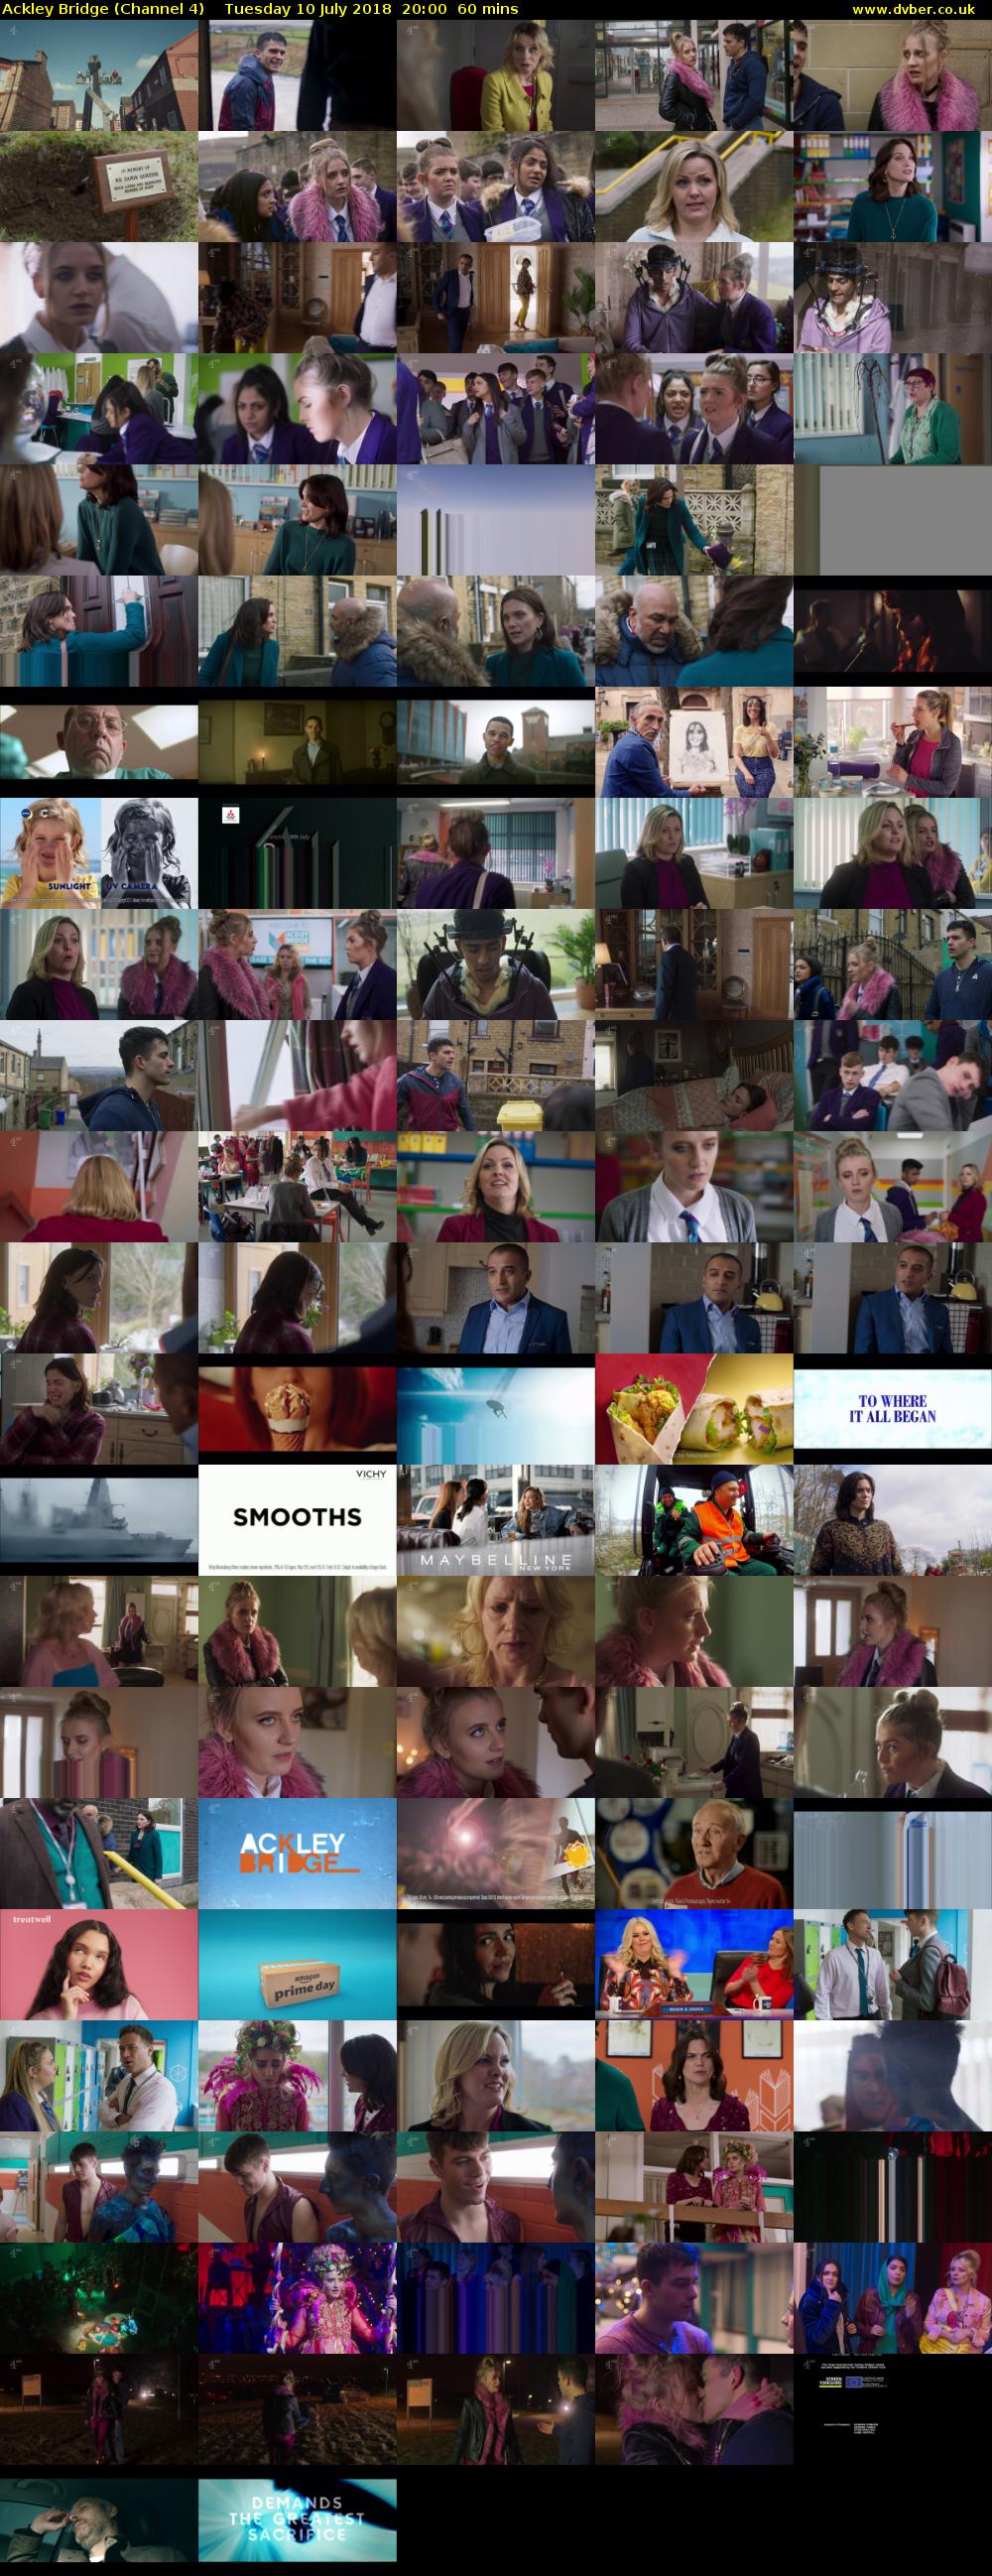 Ackley Bridge (Channel 4) Tuesday 10 July 2018 20:00 - 21:00